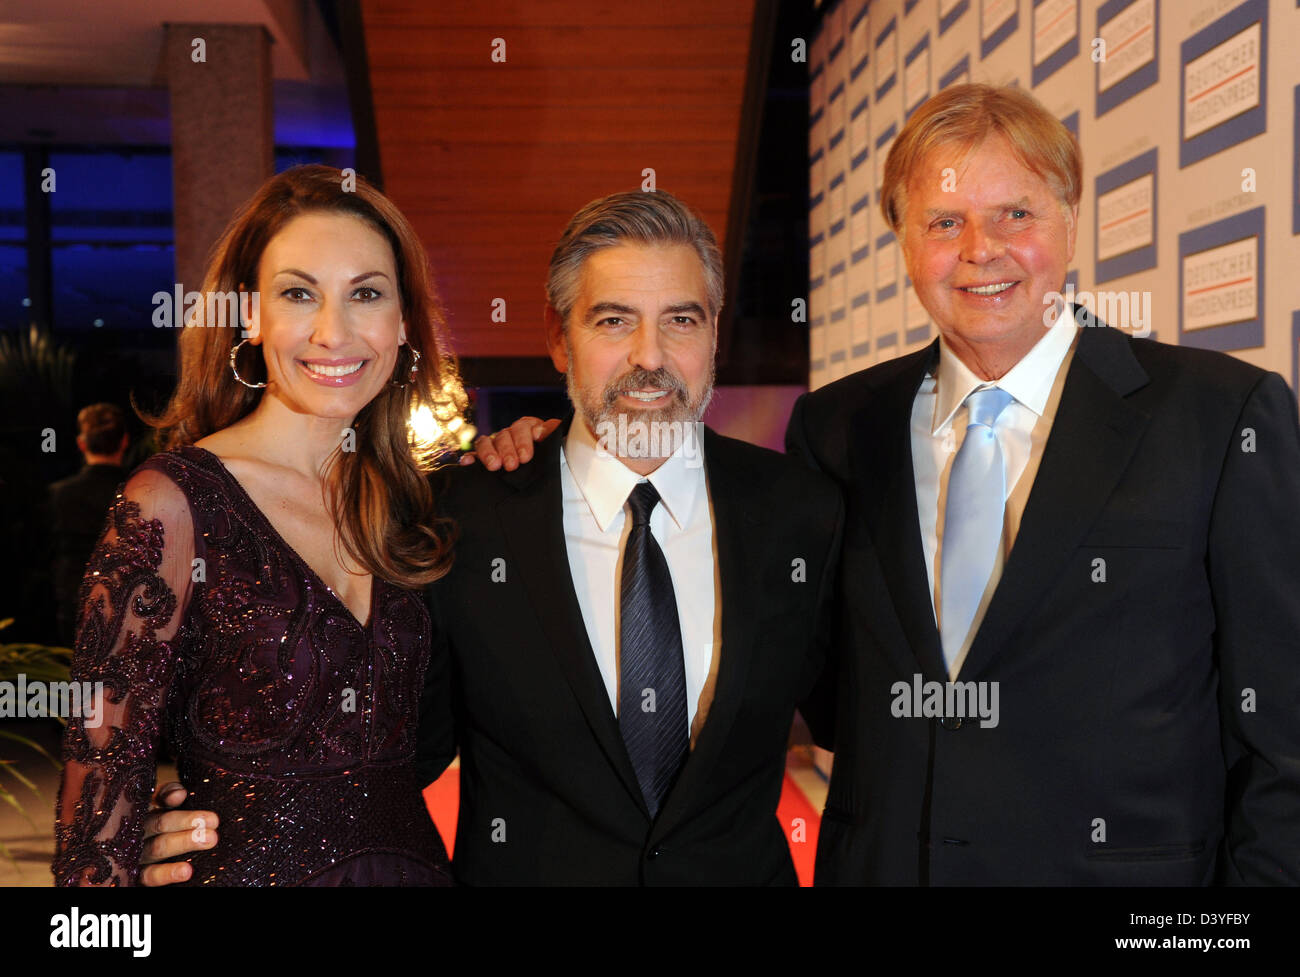 Baden-Baden, Germany. 26th February 2013. The prizer winner of the German Media Prize 2012, US actor George Clooney (R), arrives for the award ceremony with Karlheinz Koegel of Media Control and Koegel's wife Dagmar in Baden-Baden, Germany, 26 February 2013. Photo: Uli Deck/dpa/Alamy Live News Stock Photo